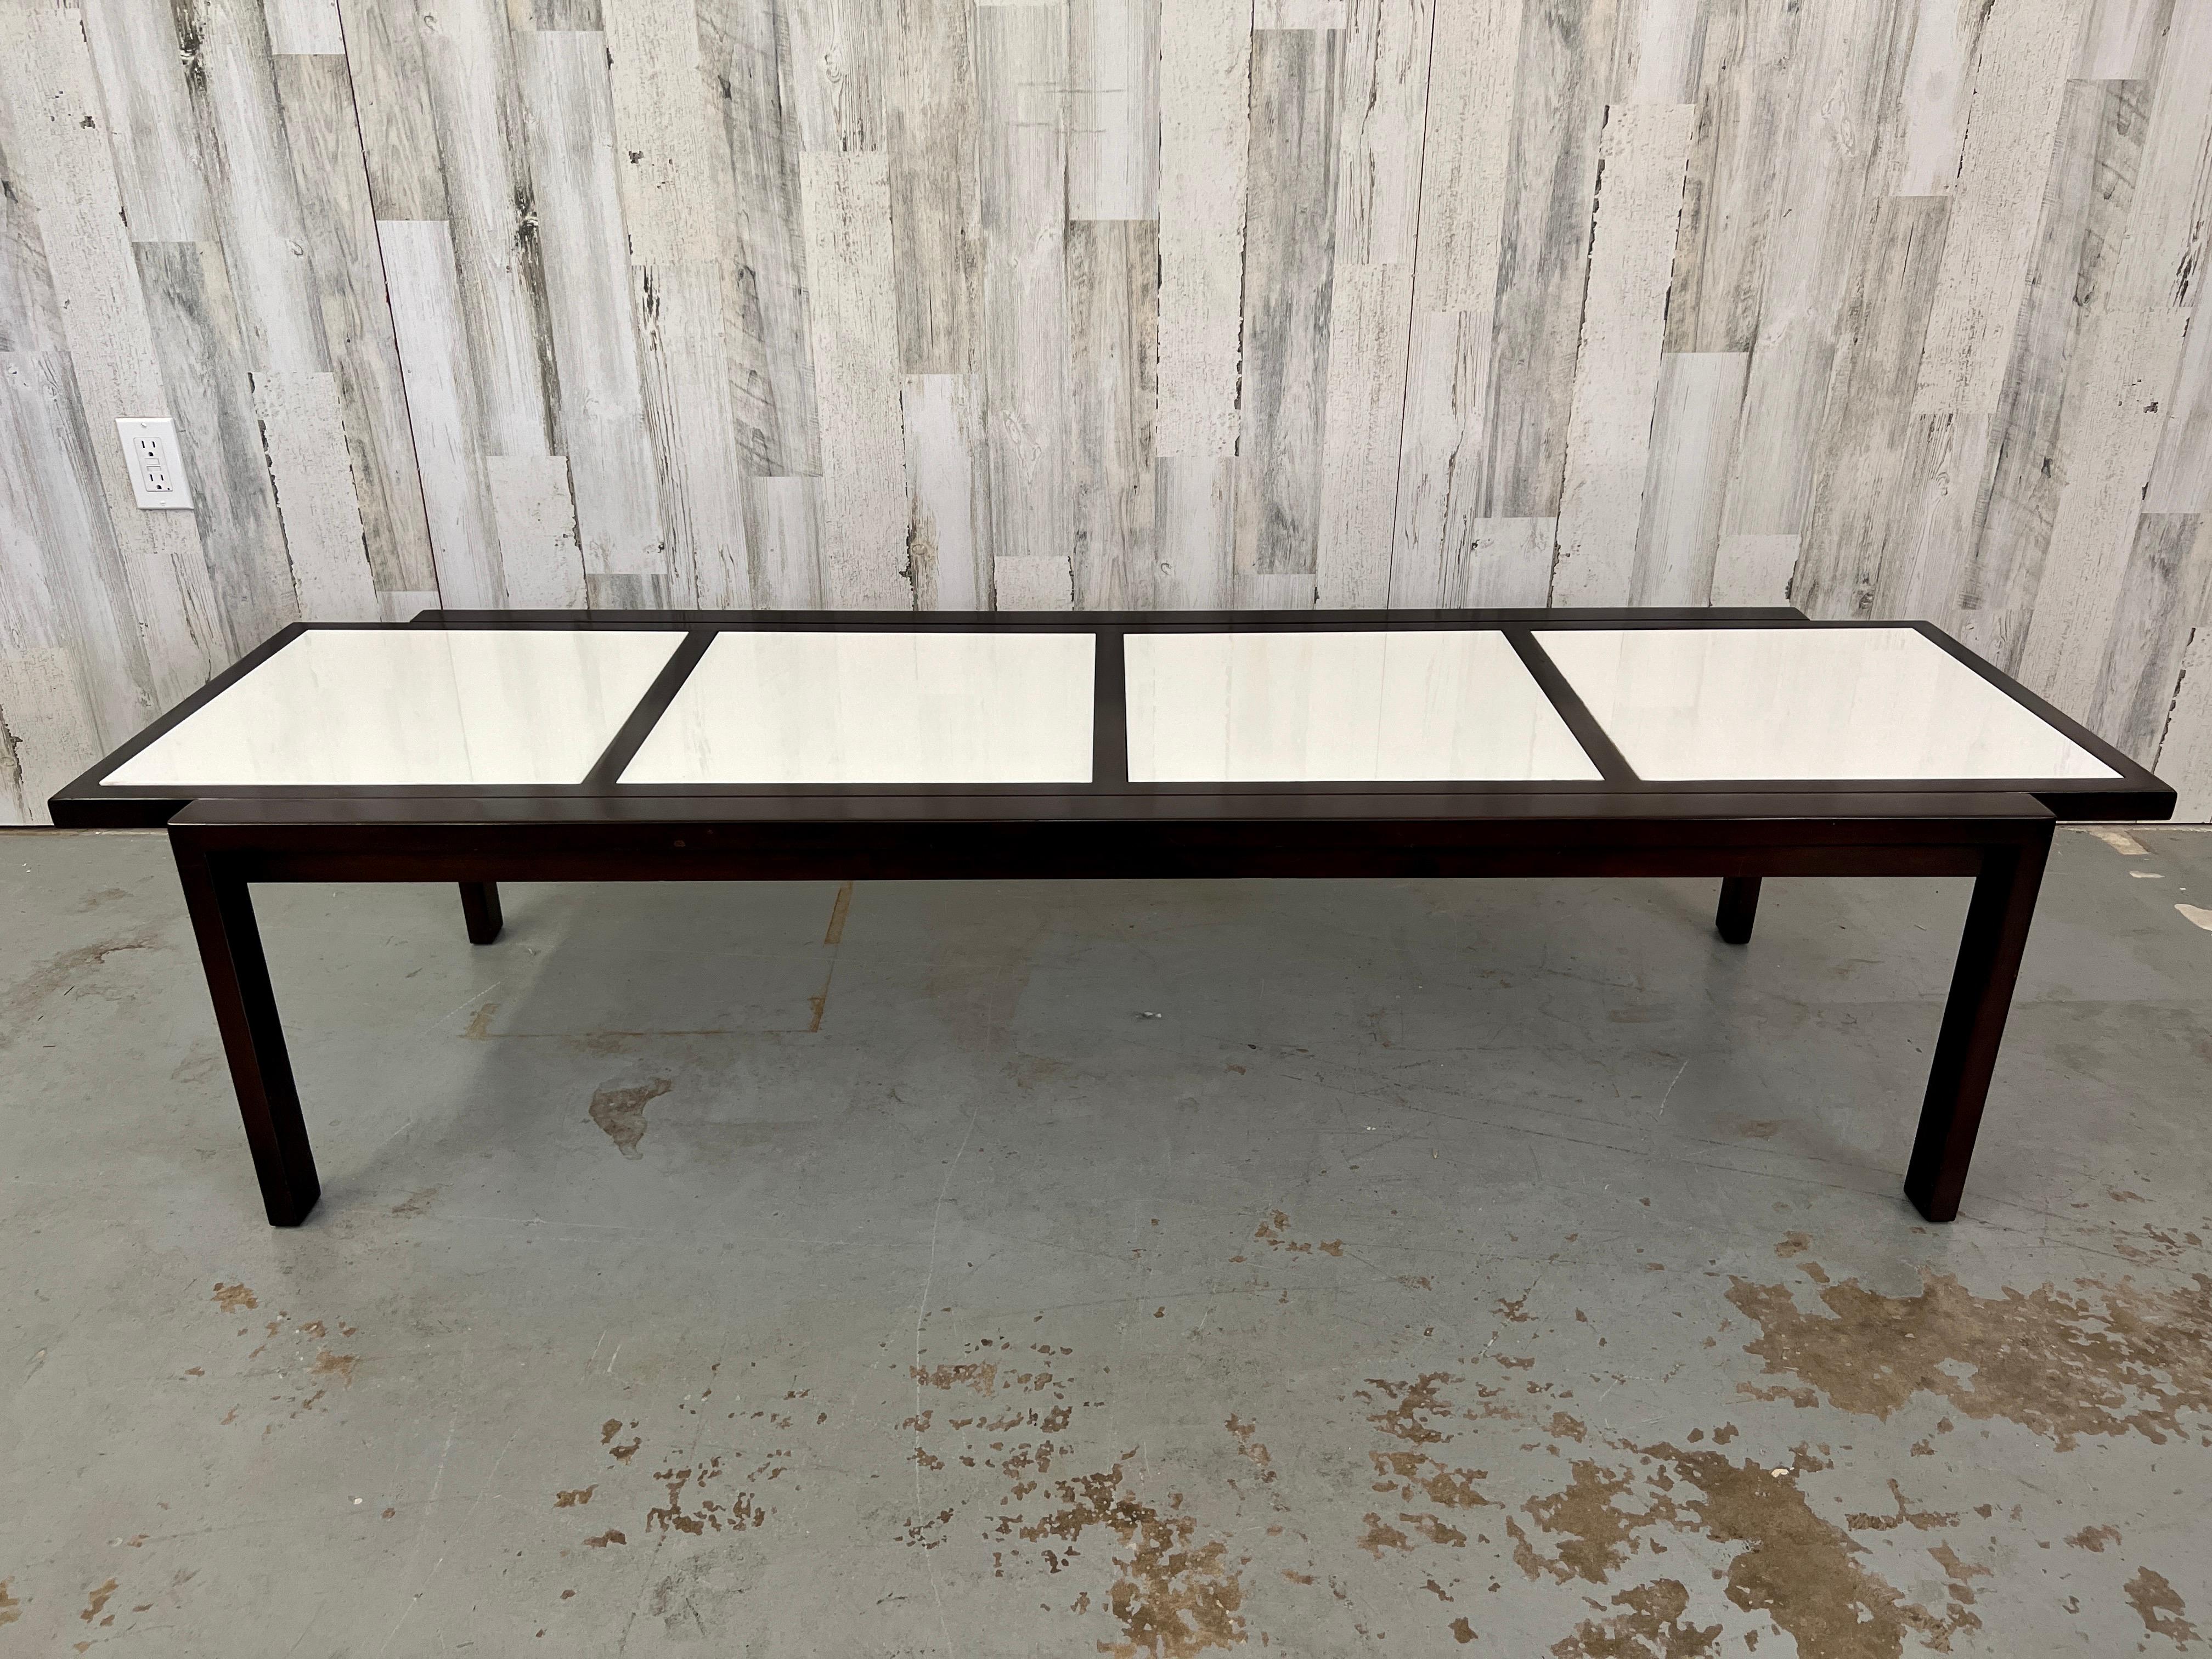 Modernist ebonized cocktail table with milk glass tiles.